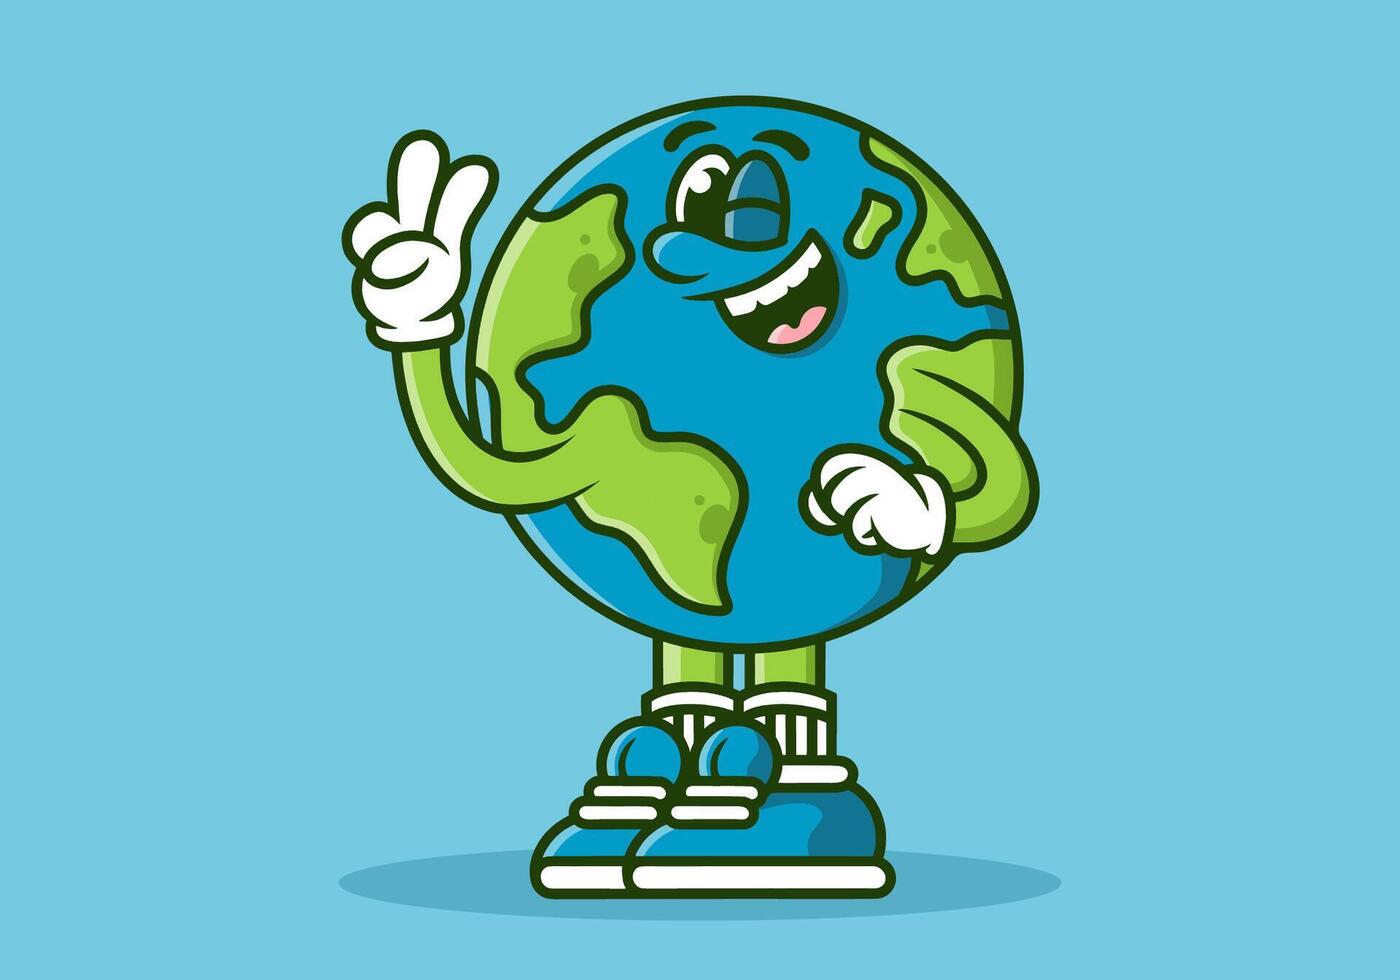 Character illustration of earth with hands forming a symbol of peace. blue green colors vector